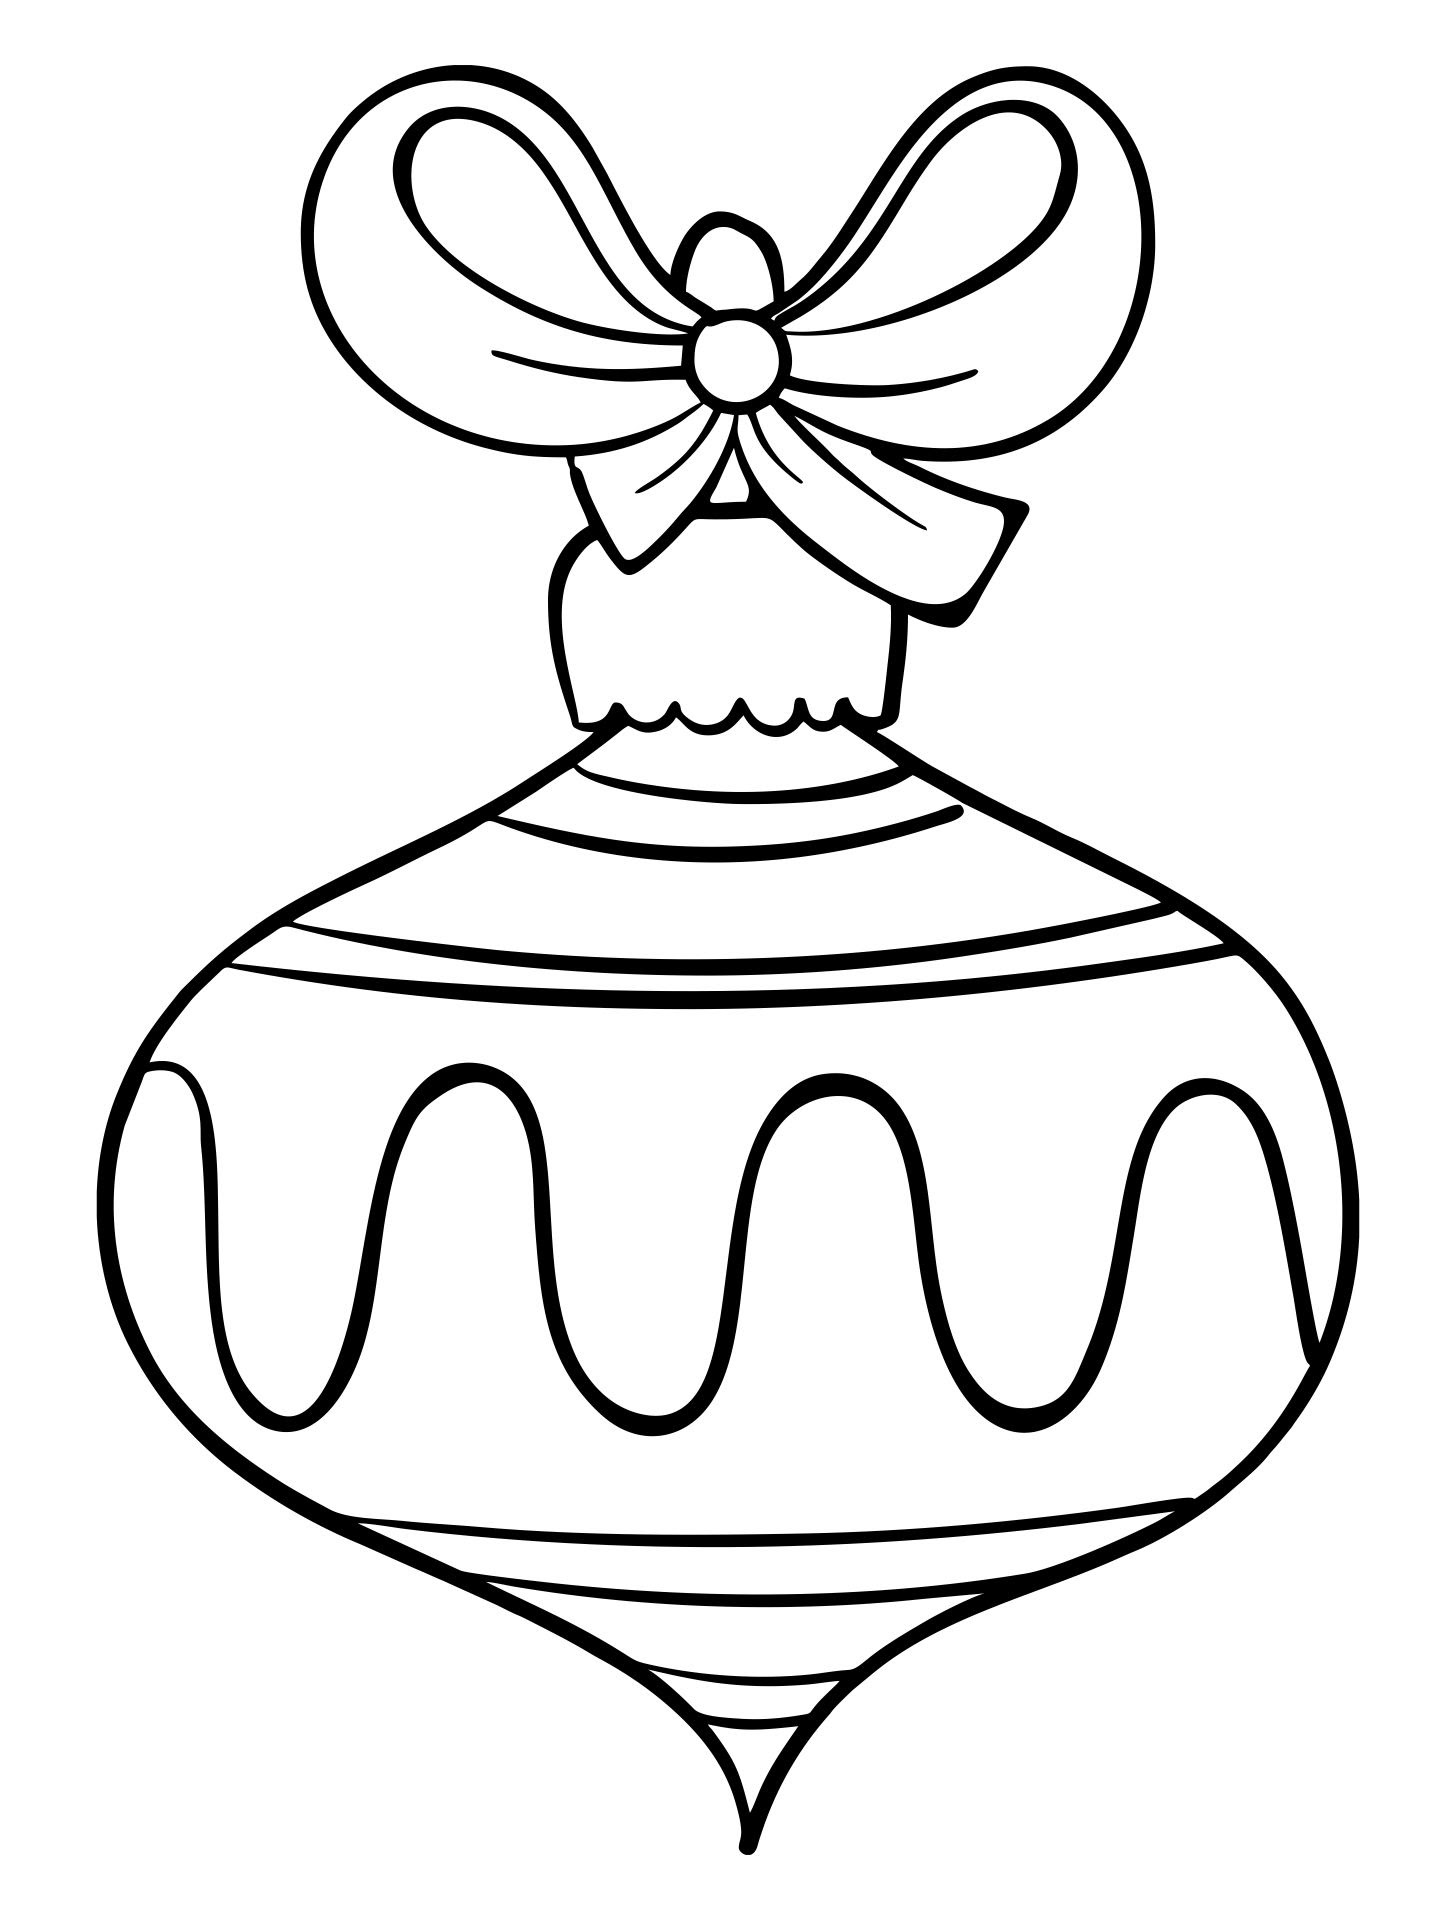 round-christmas-ornament-coloring-page-free-printable-coloring-pages-coloring-pages